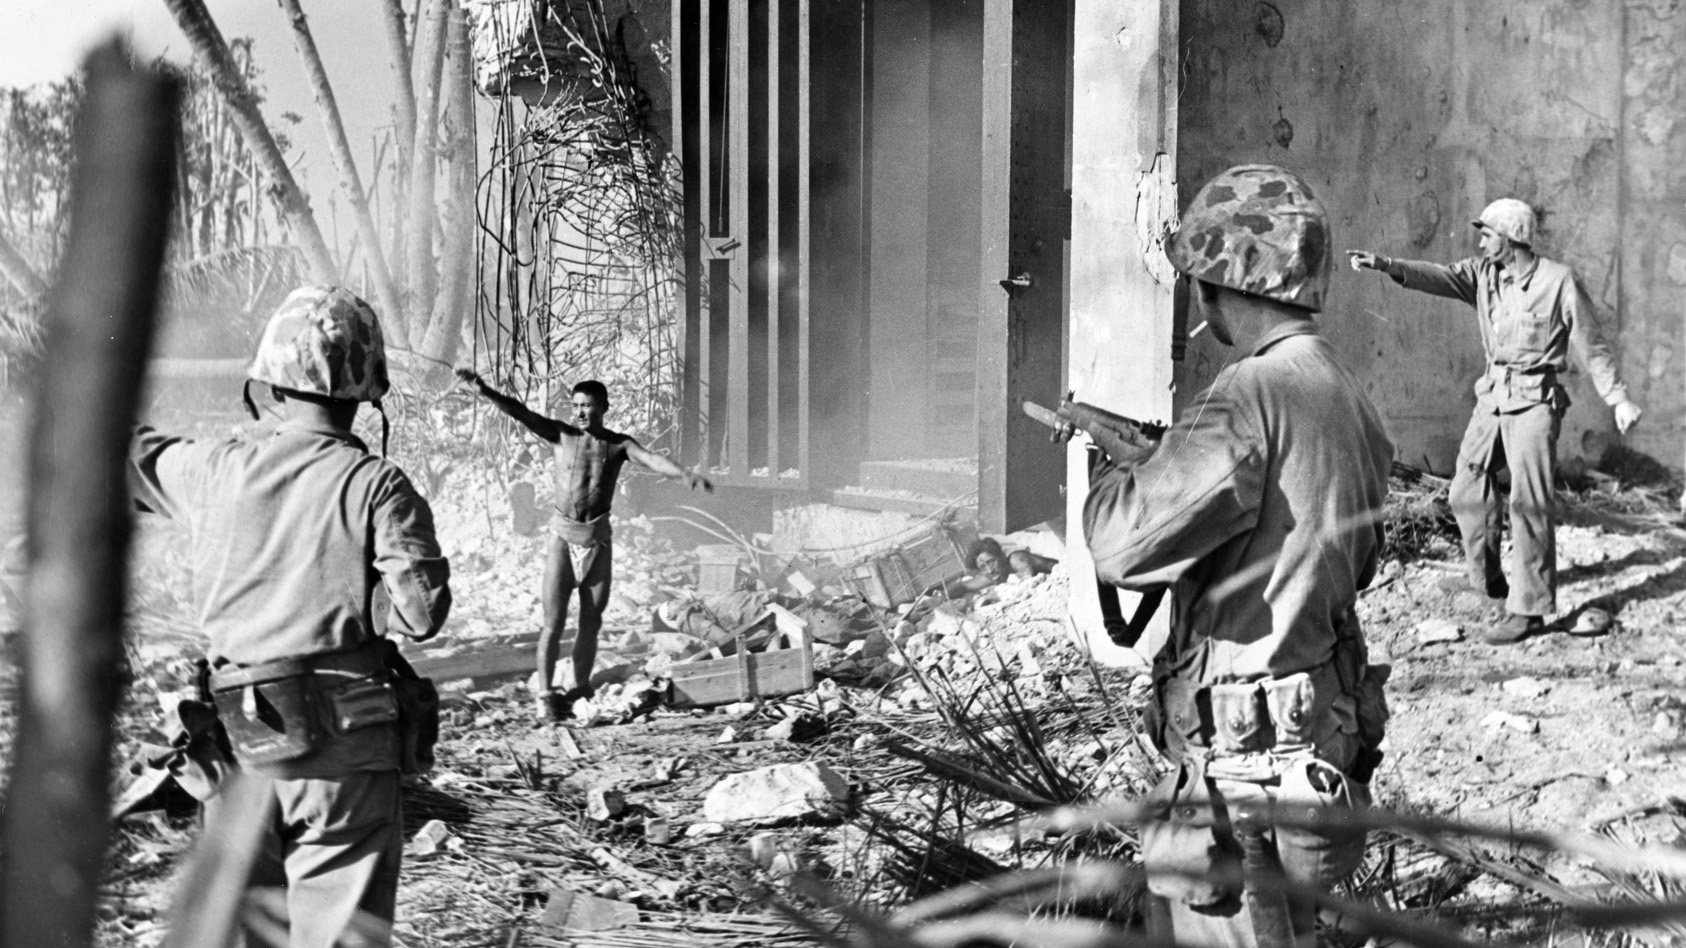 Weary of fighting, a Japanese soldier raises his hands in surrender at Roi-Namur as a companion begins climbing out of a hole near the center of this photograph. These are two of only a handful of Japanese troops that survived the fighting on Roi-Namur, choosing surrender rather than suicide. A wary Marine covers the prisoner with his rifle, taking no chances.